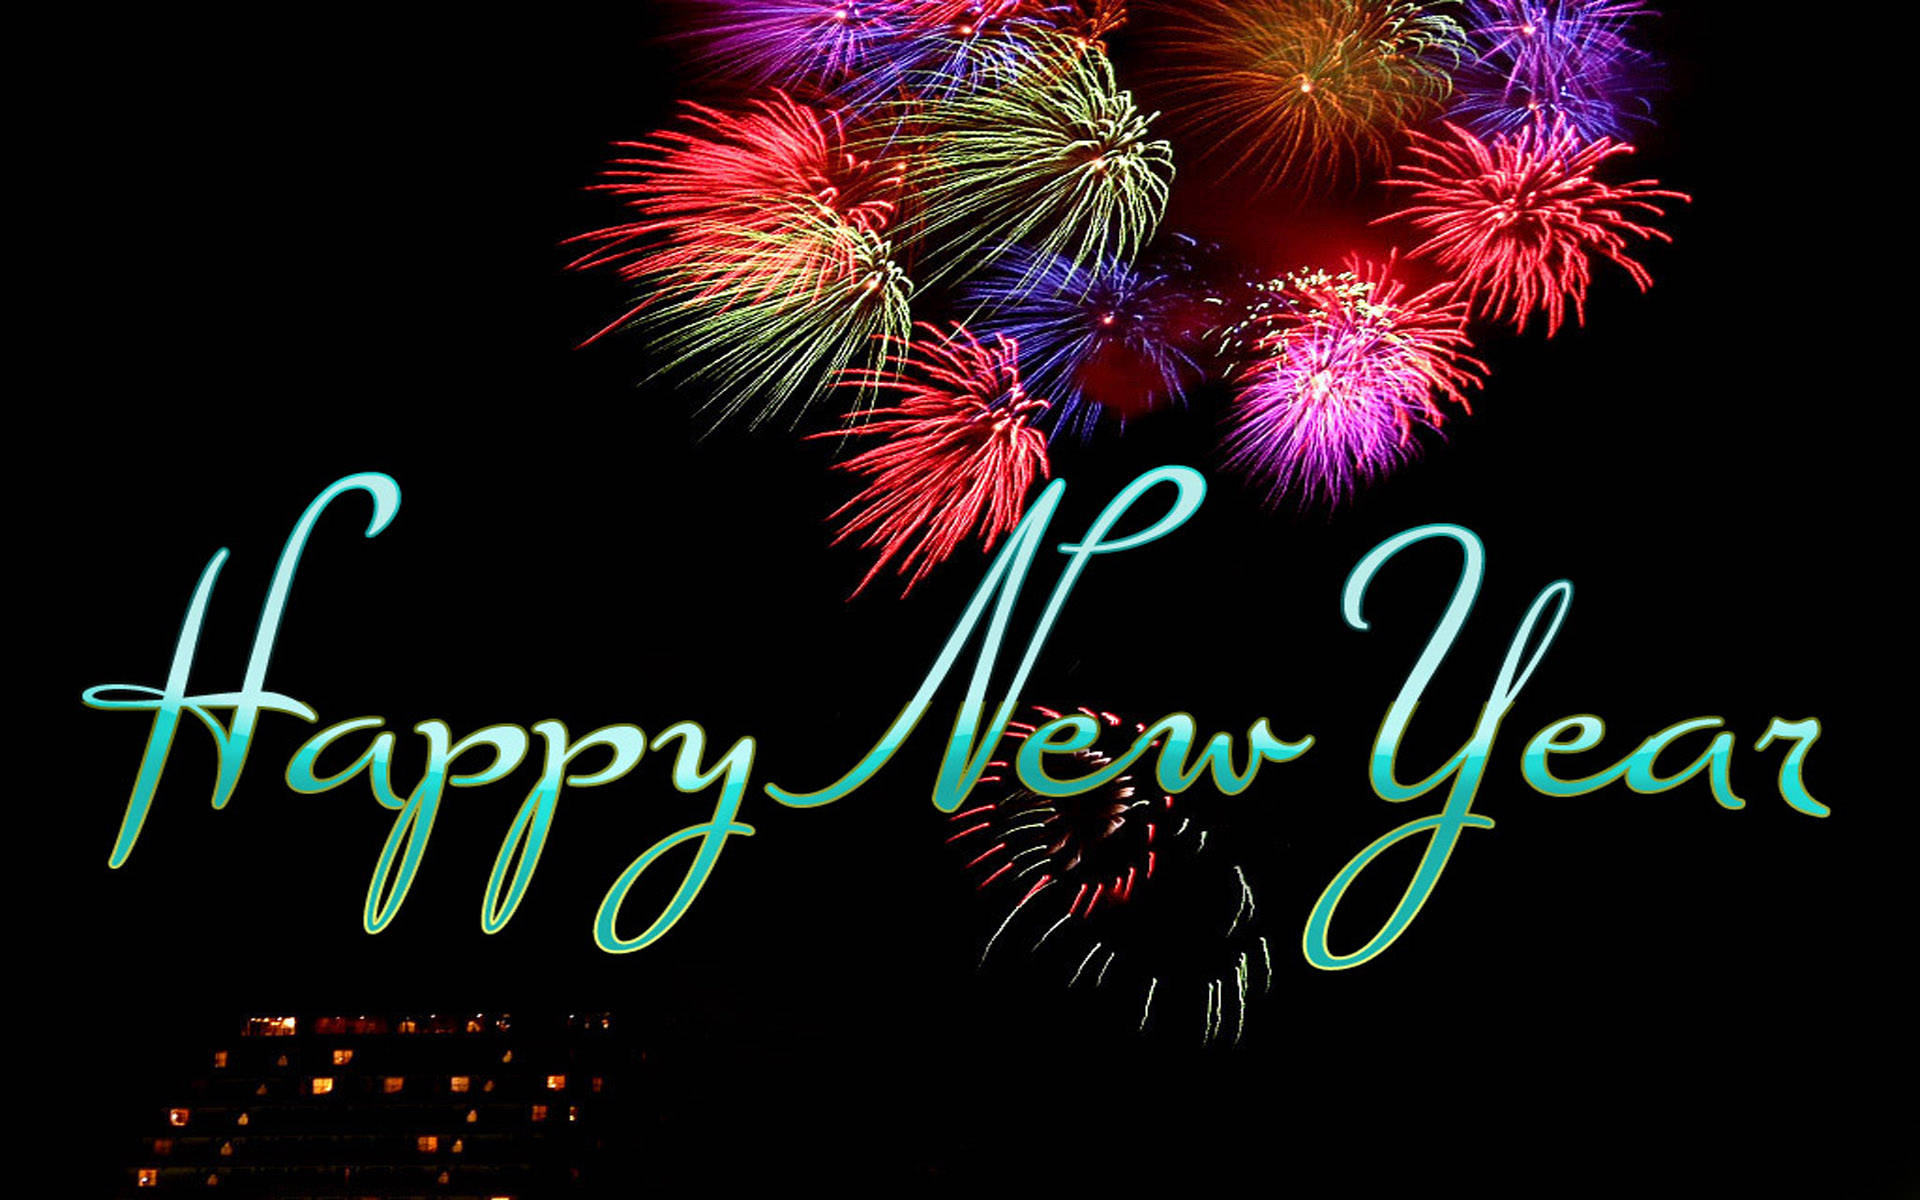 New Year Greeting Colorful Fireworks Background